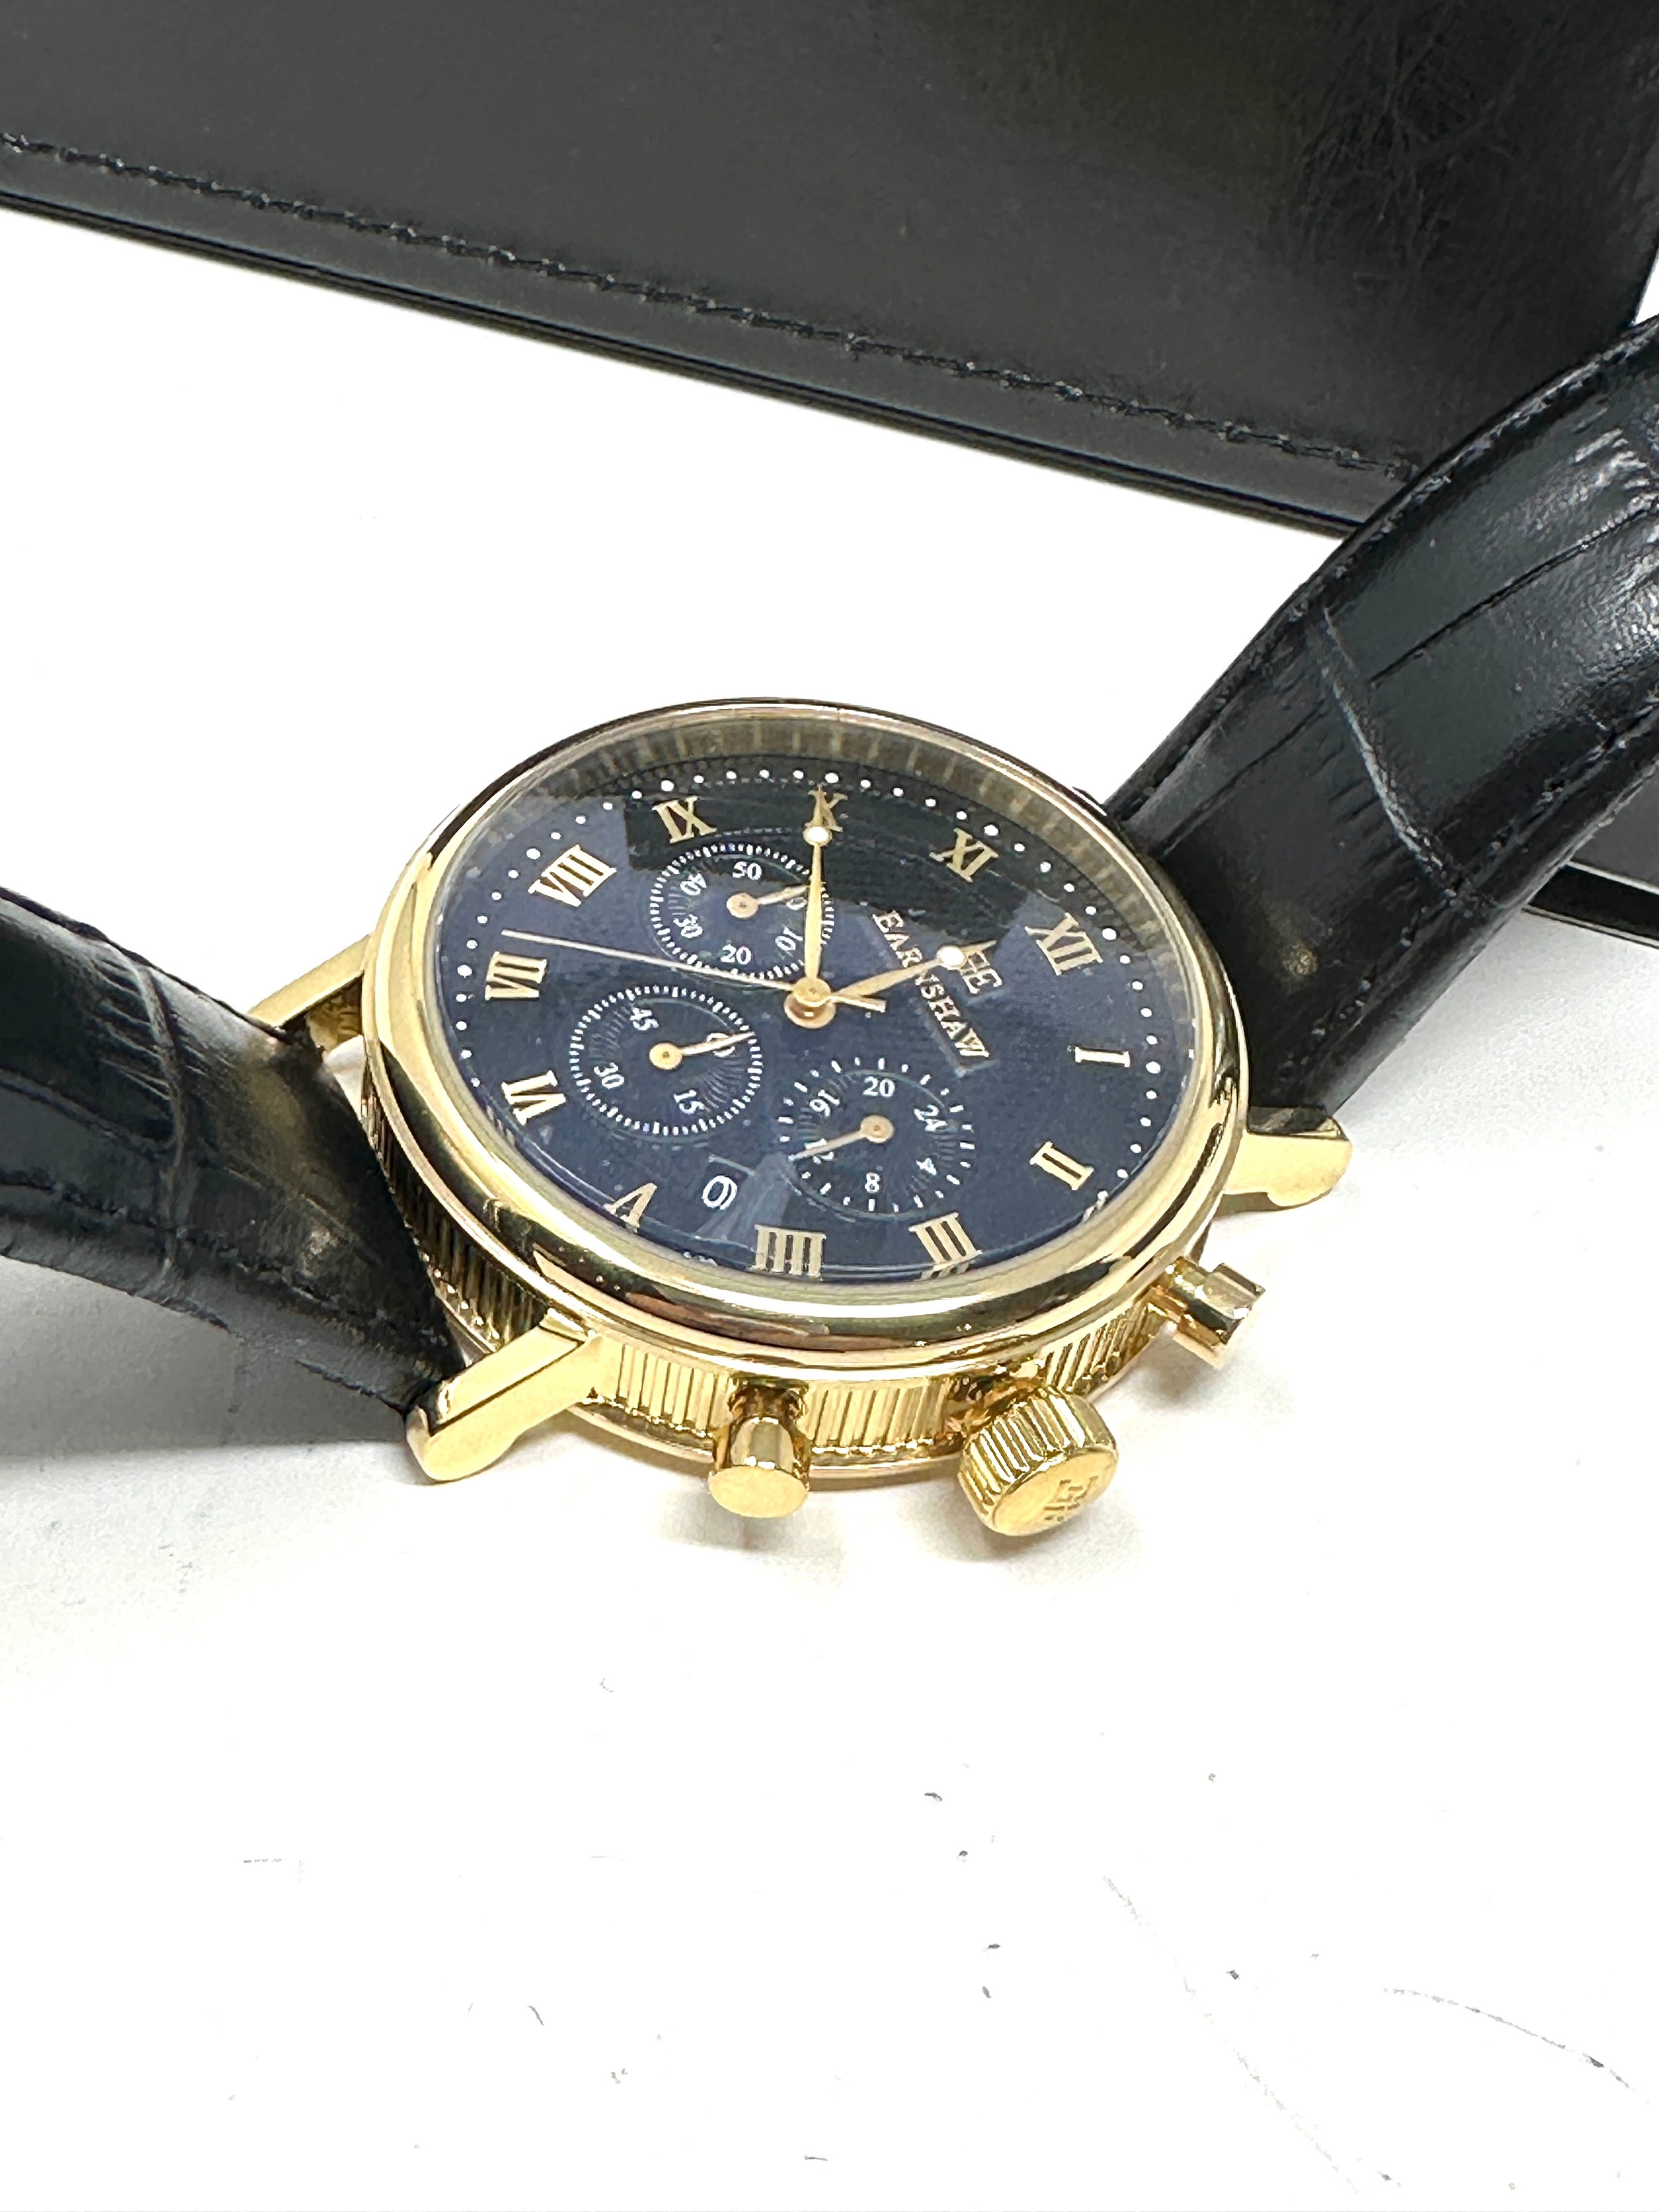 New boxed thomas earnshaw chronograph gents wristwatch the watch is ticking - Bild 3 aus 4